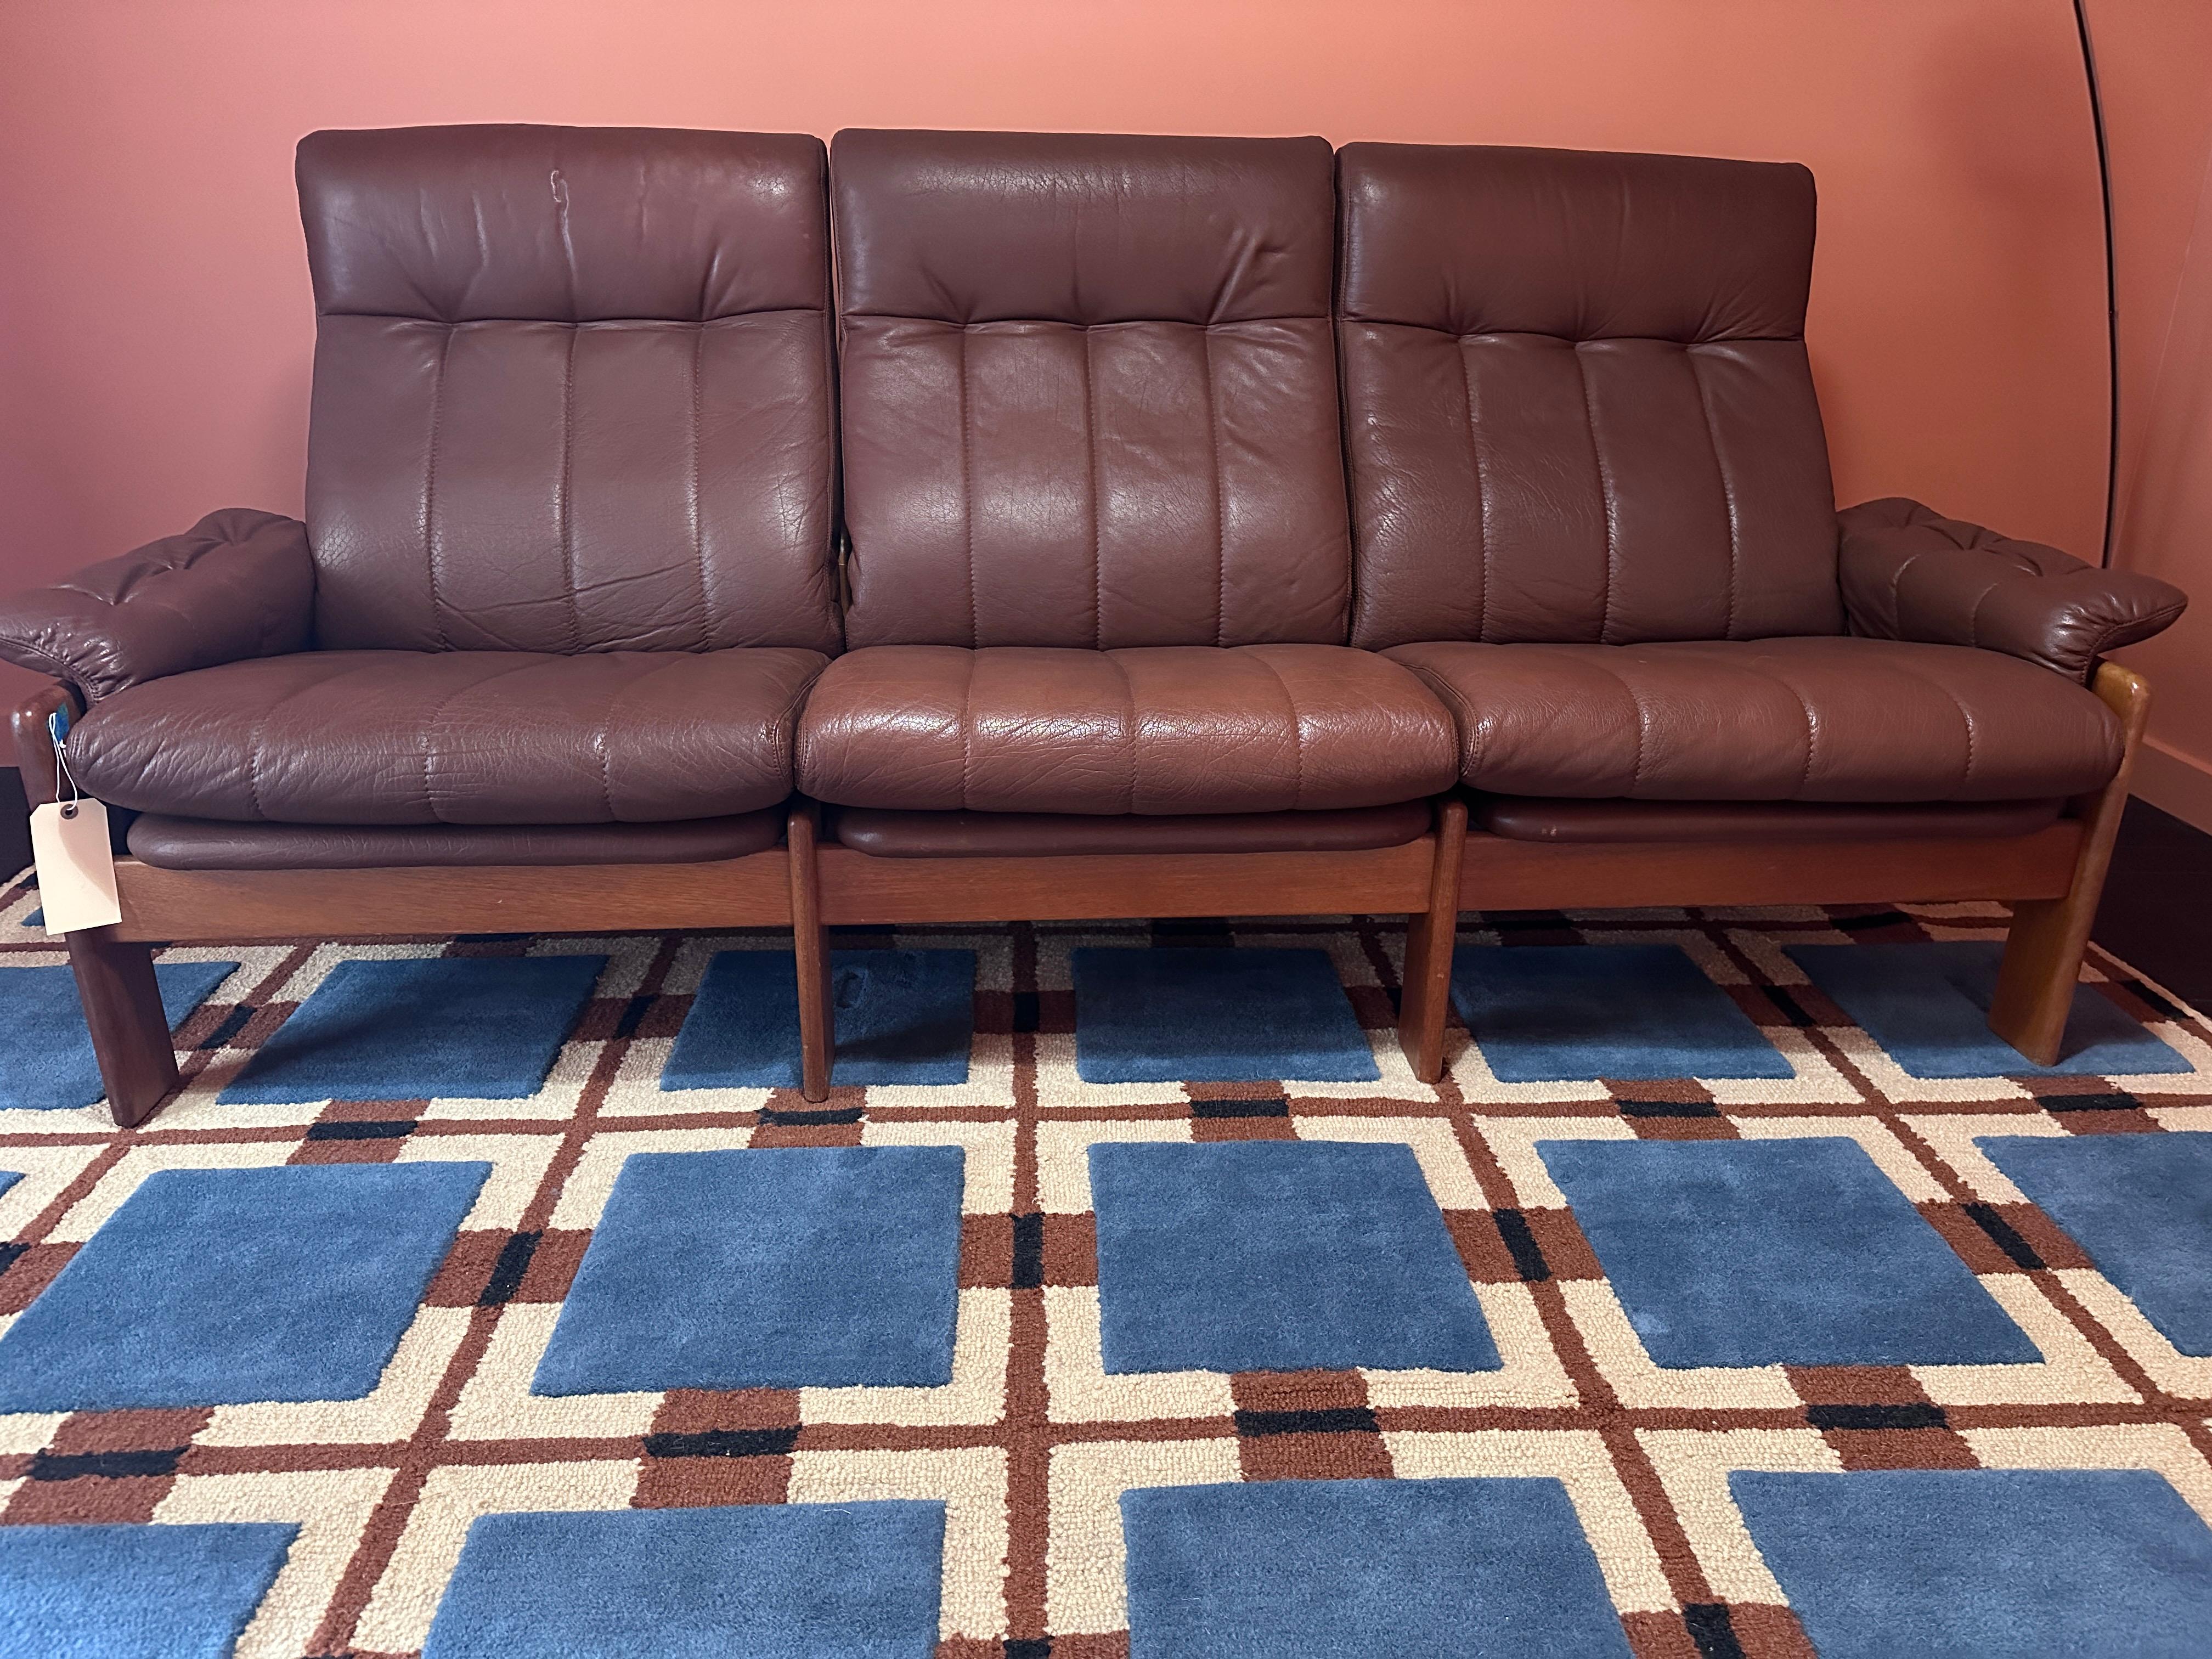 Teak and leather three-seater sofa by Skipper Mobler in excellent vintage condition with minimal age-consistent wear.